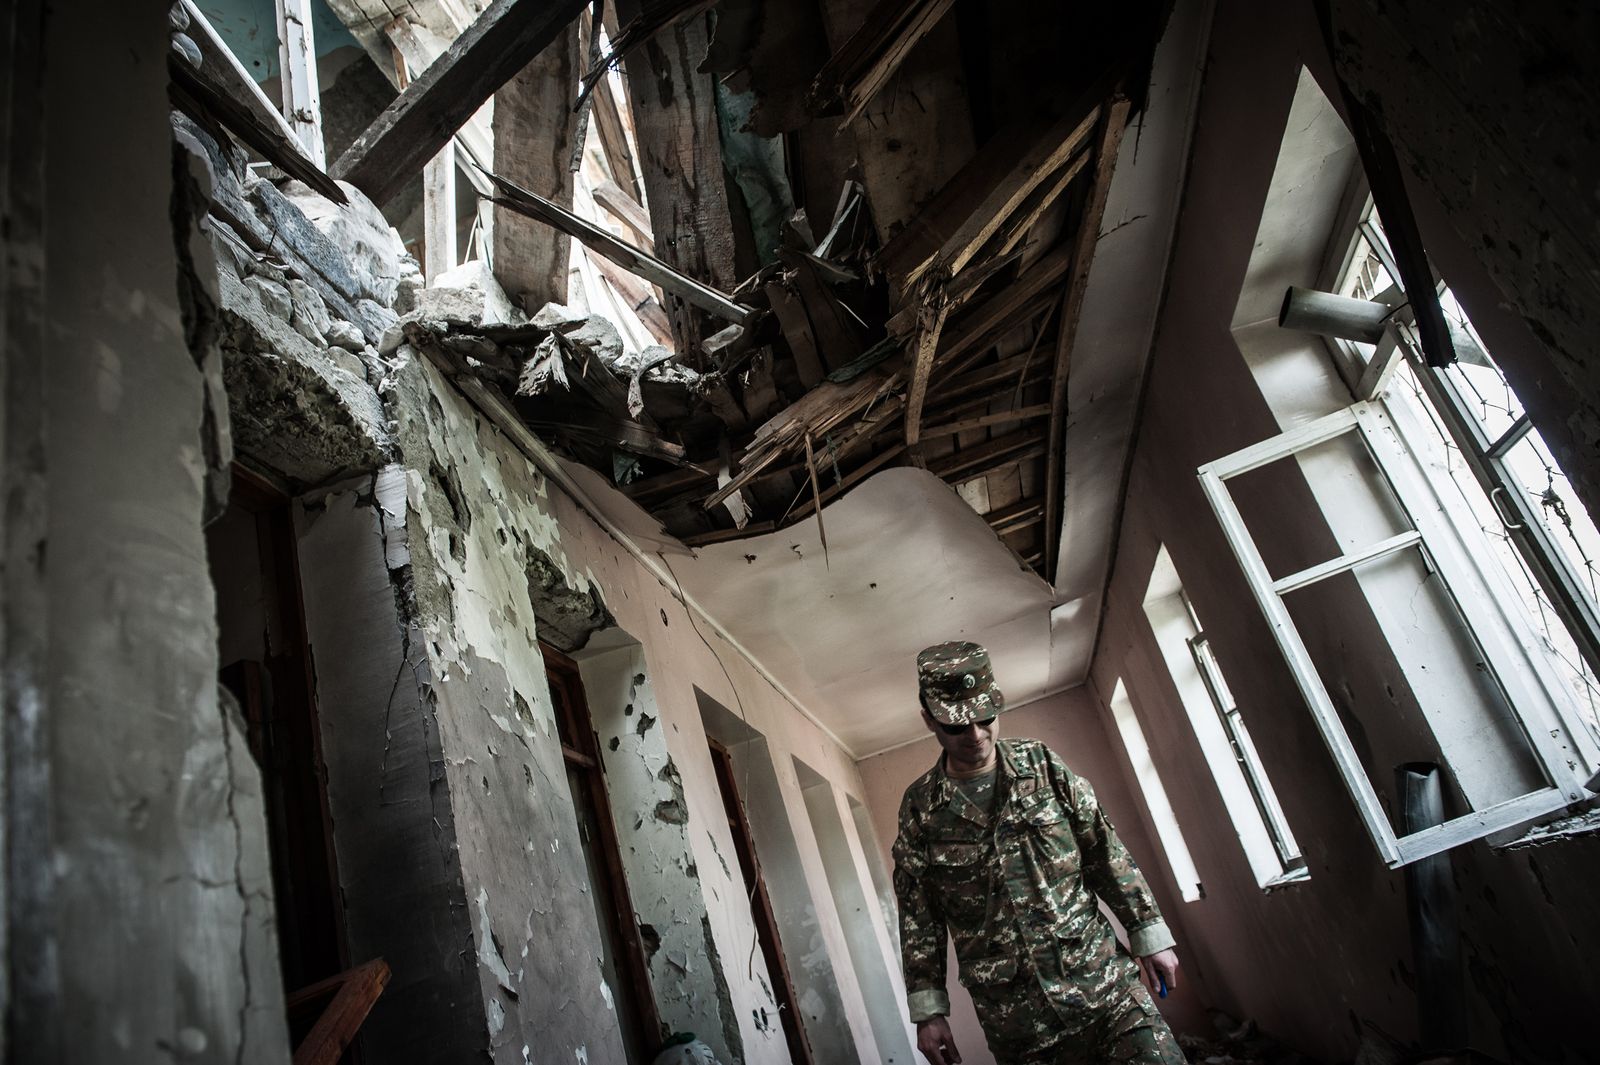 © Mattia Vacca - Image from the The forgotten war of Nagorno Karabakh photography project